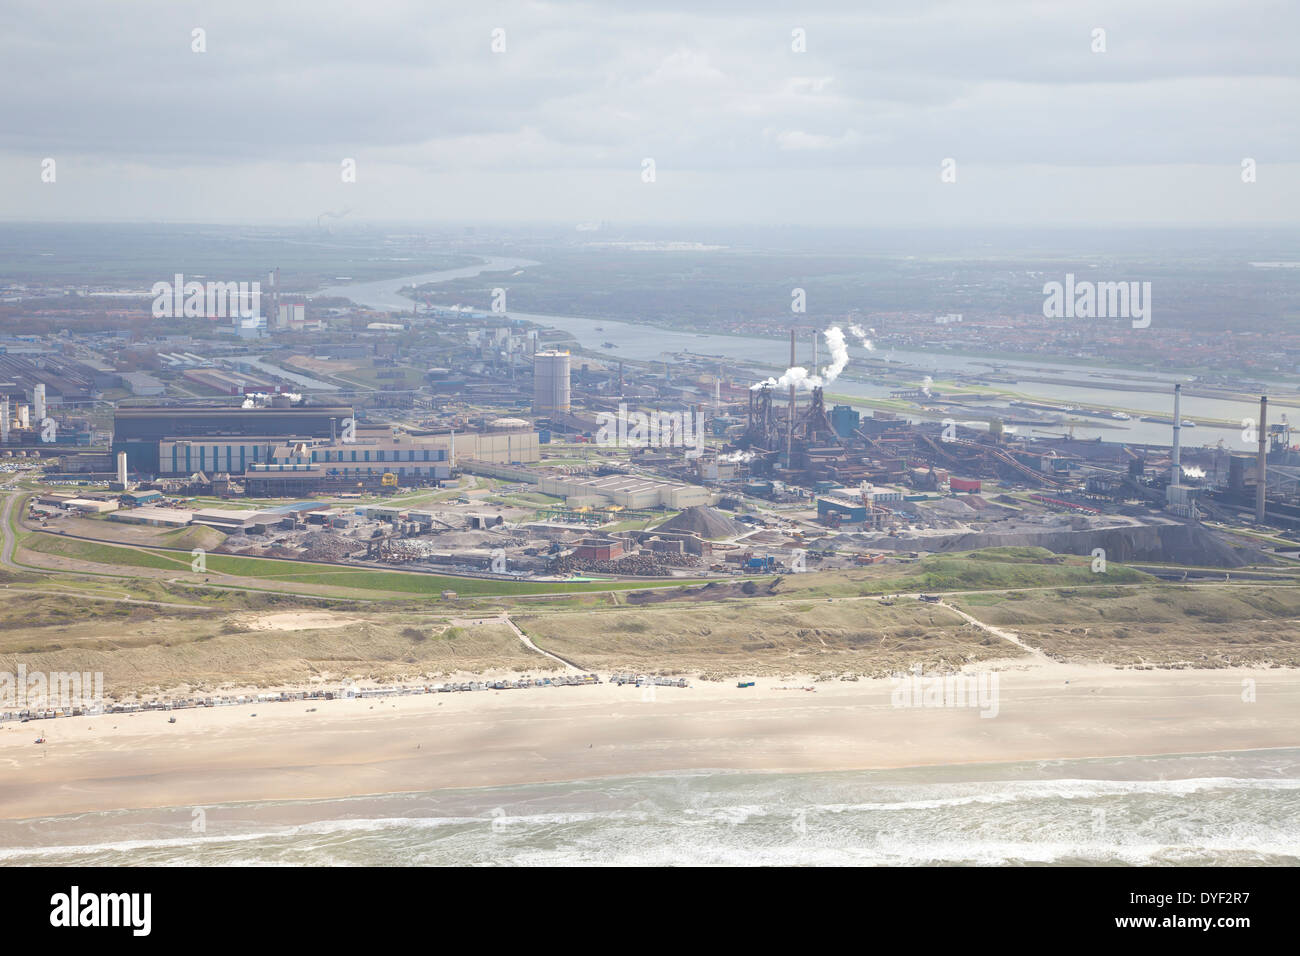 Steel industry at Velsen, The Netherlands from above Stock Photo